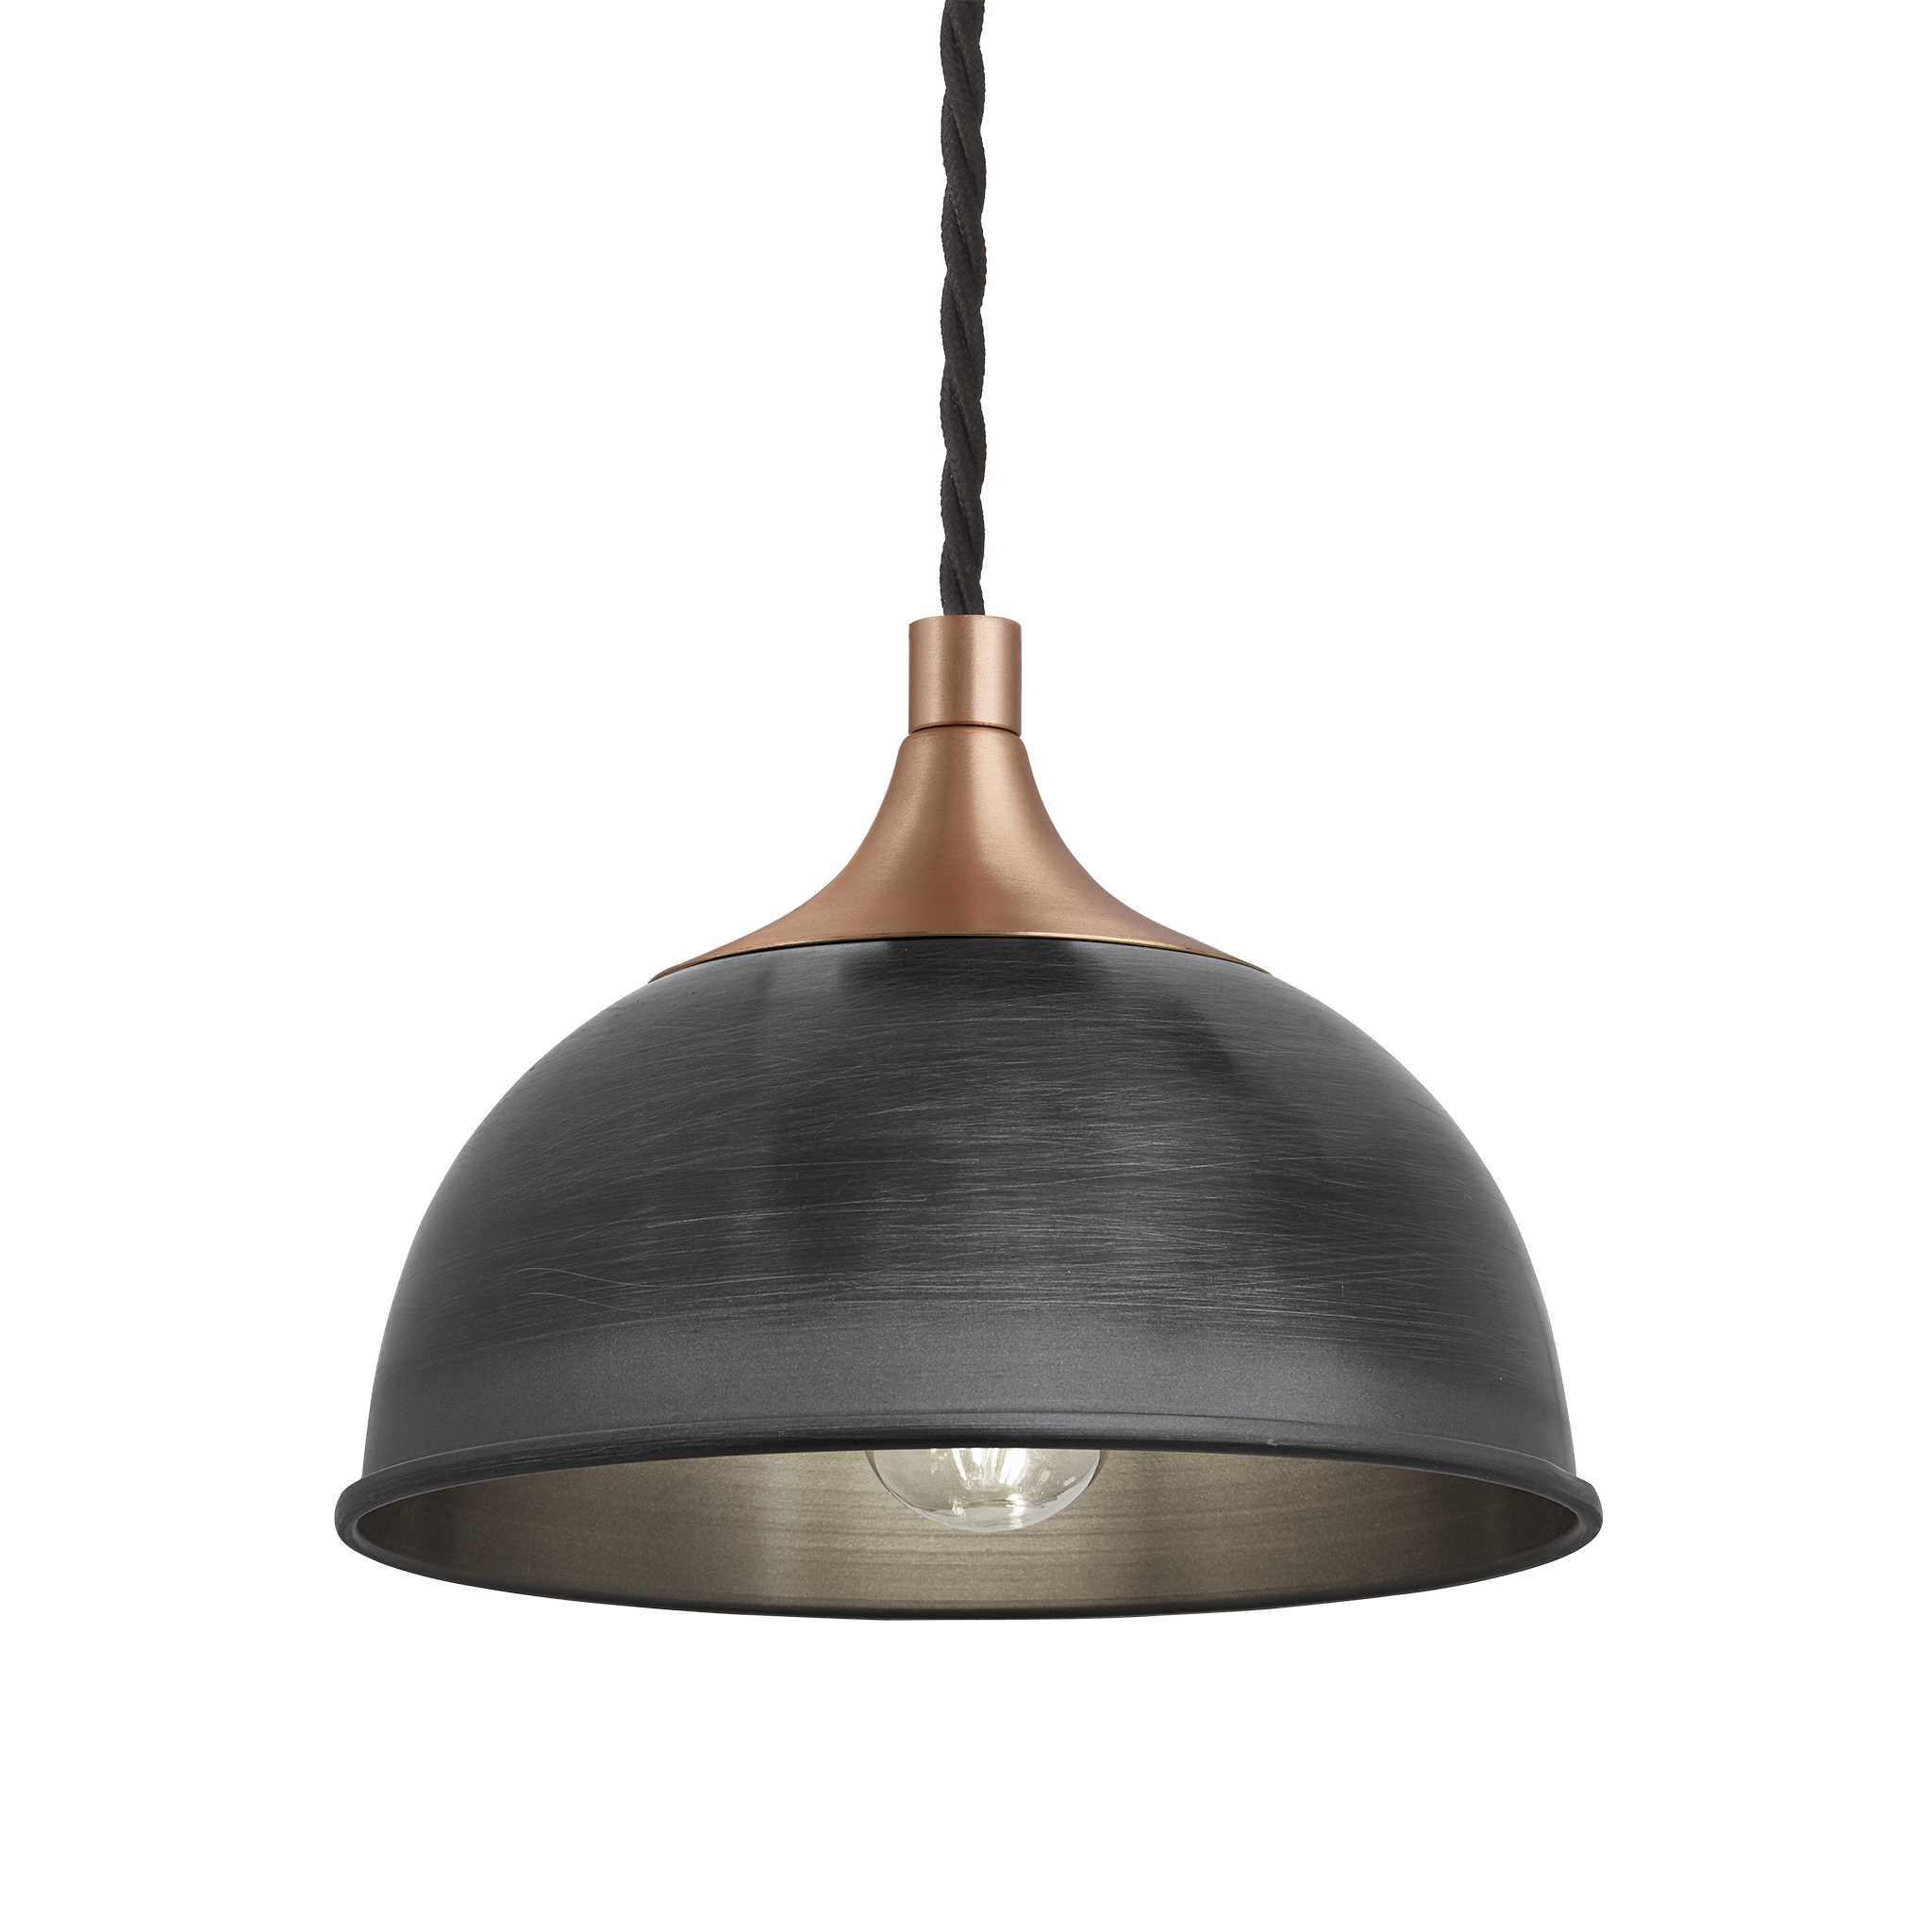 Chelsea Dome Pendant - 8 Inch - Pewter - Copper Holder